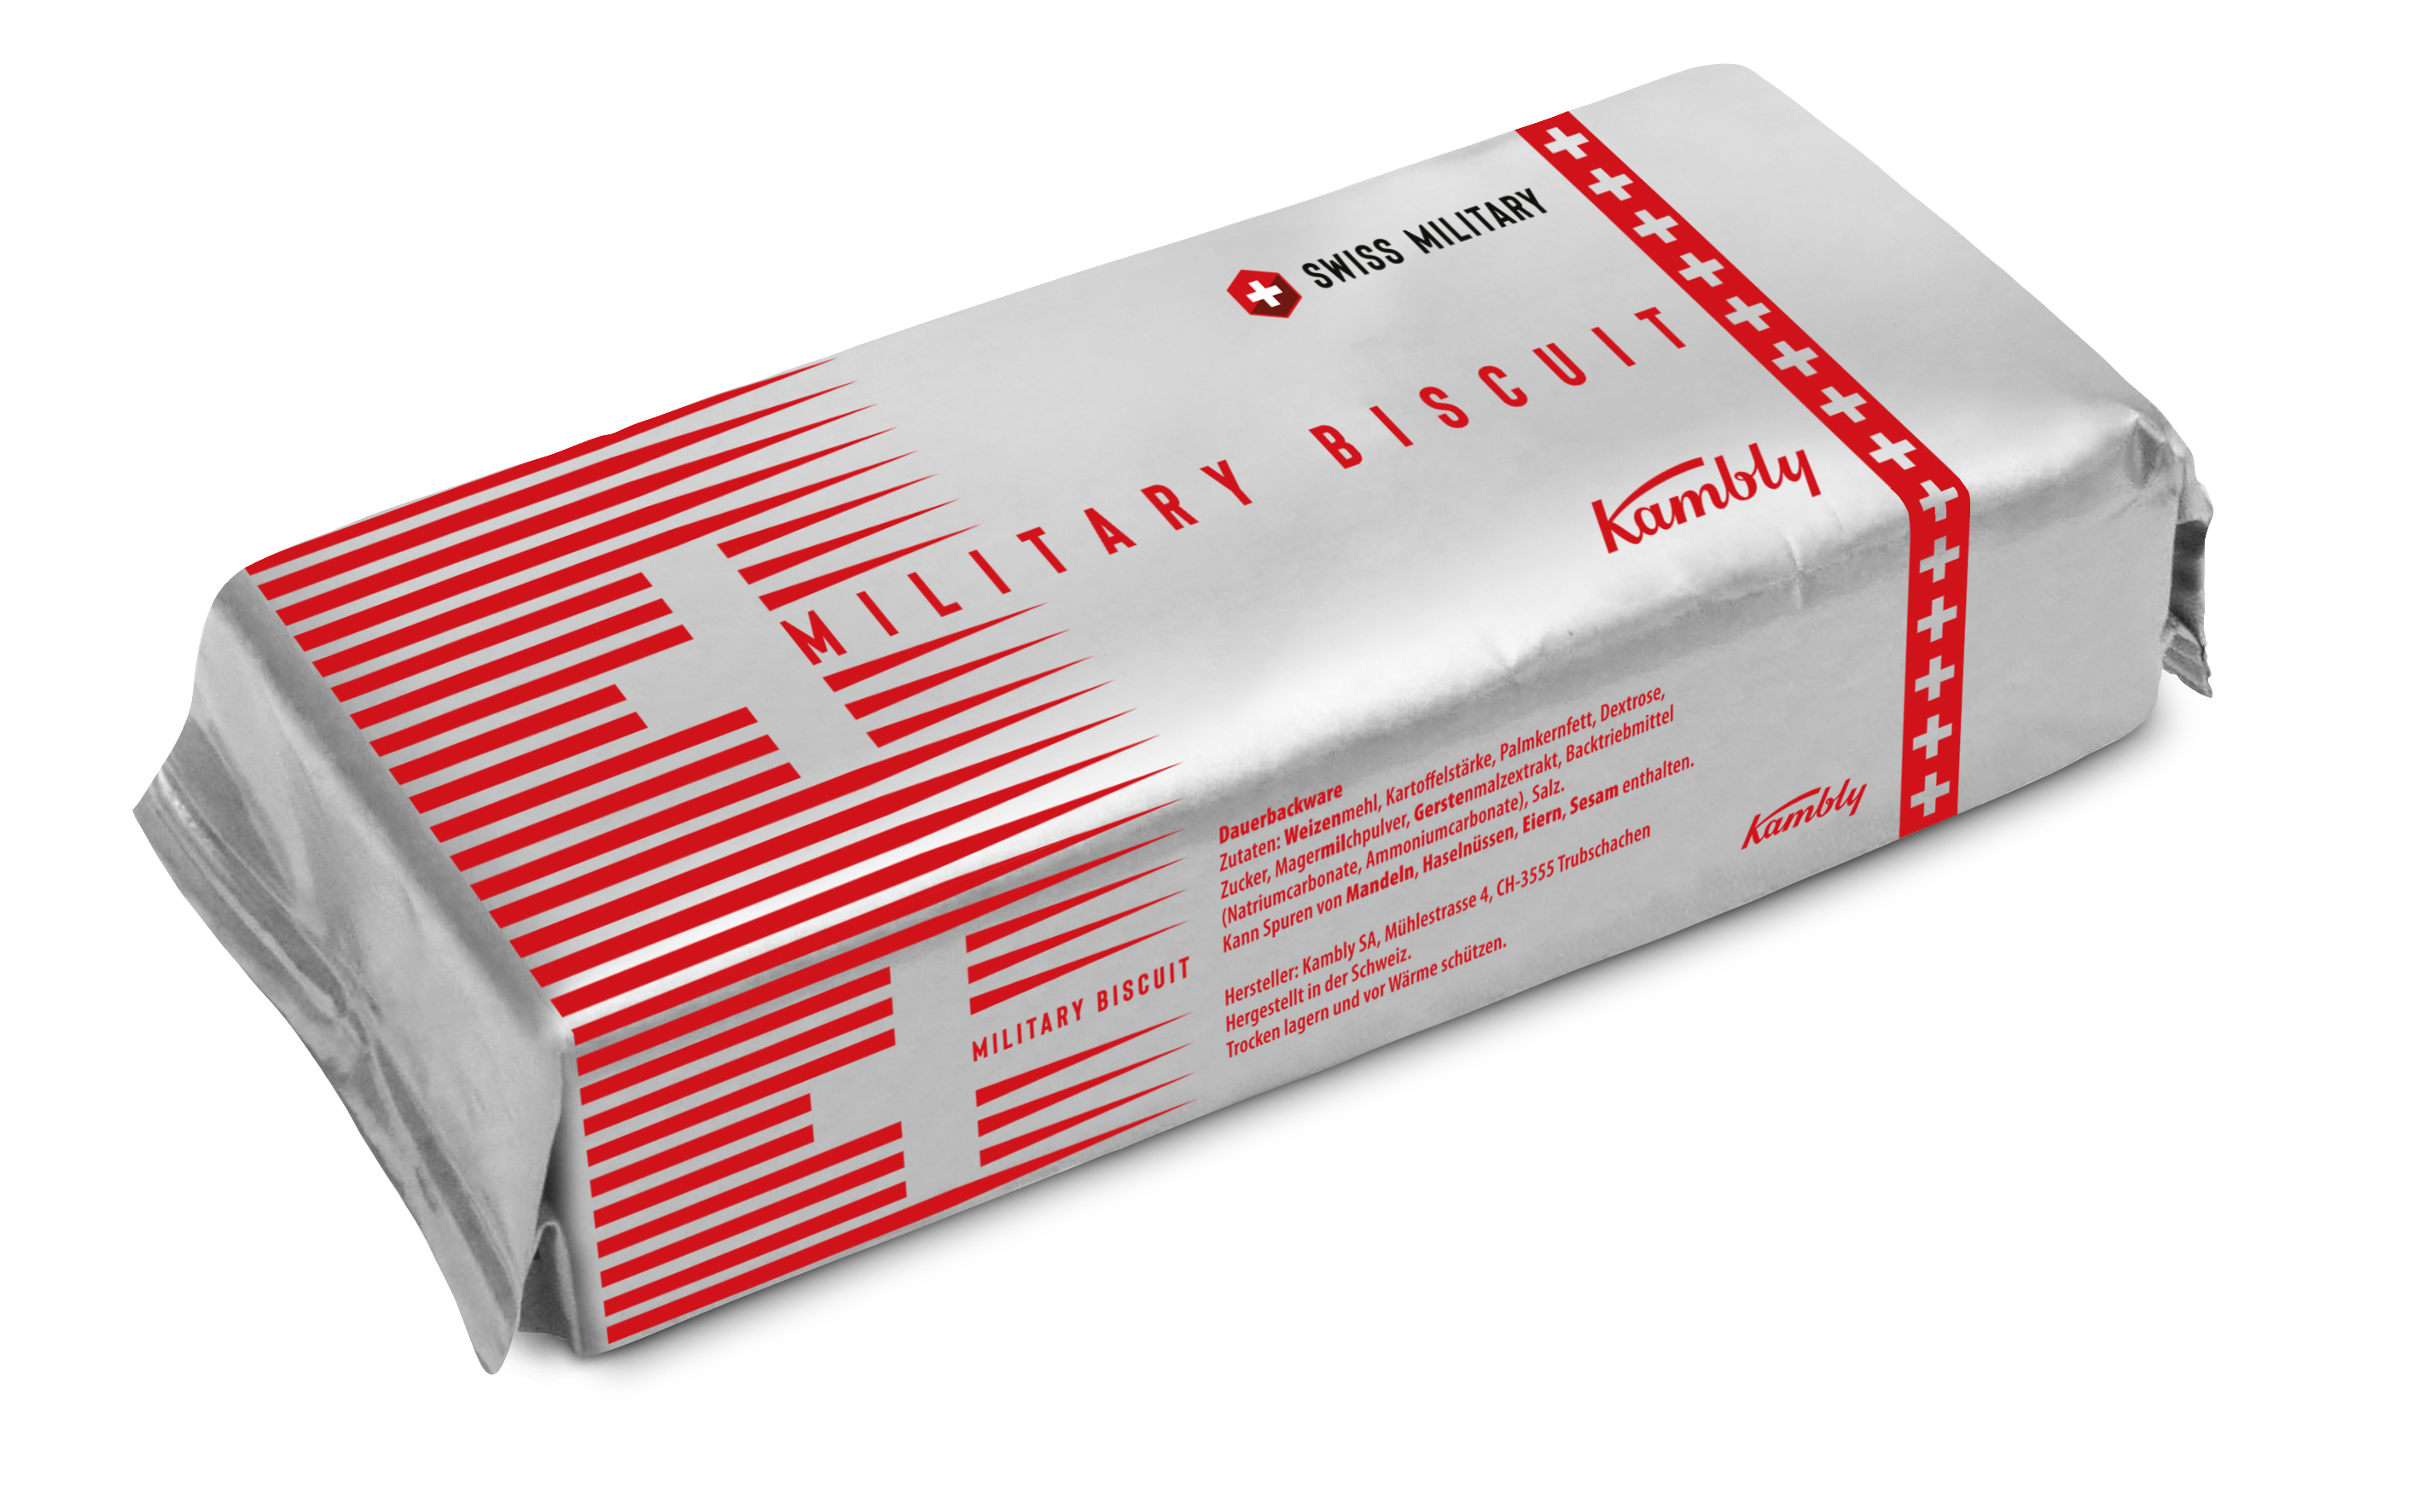 Kambly Swiss Military Biscuit